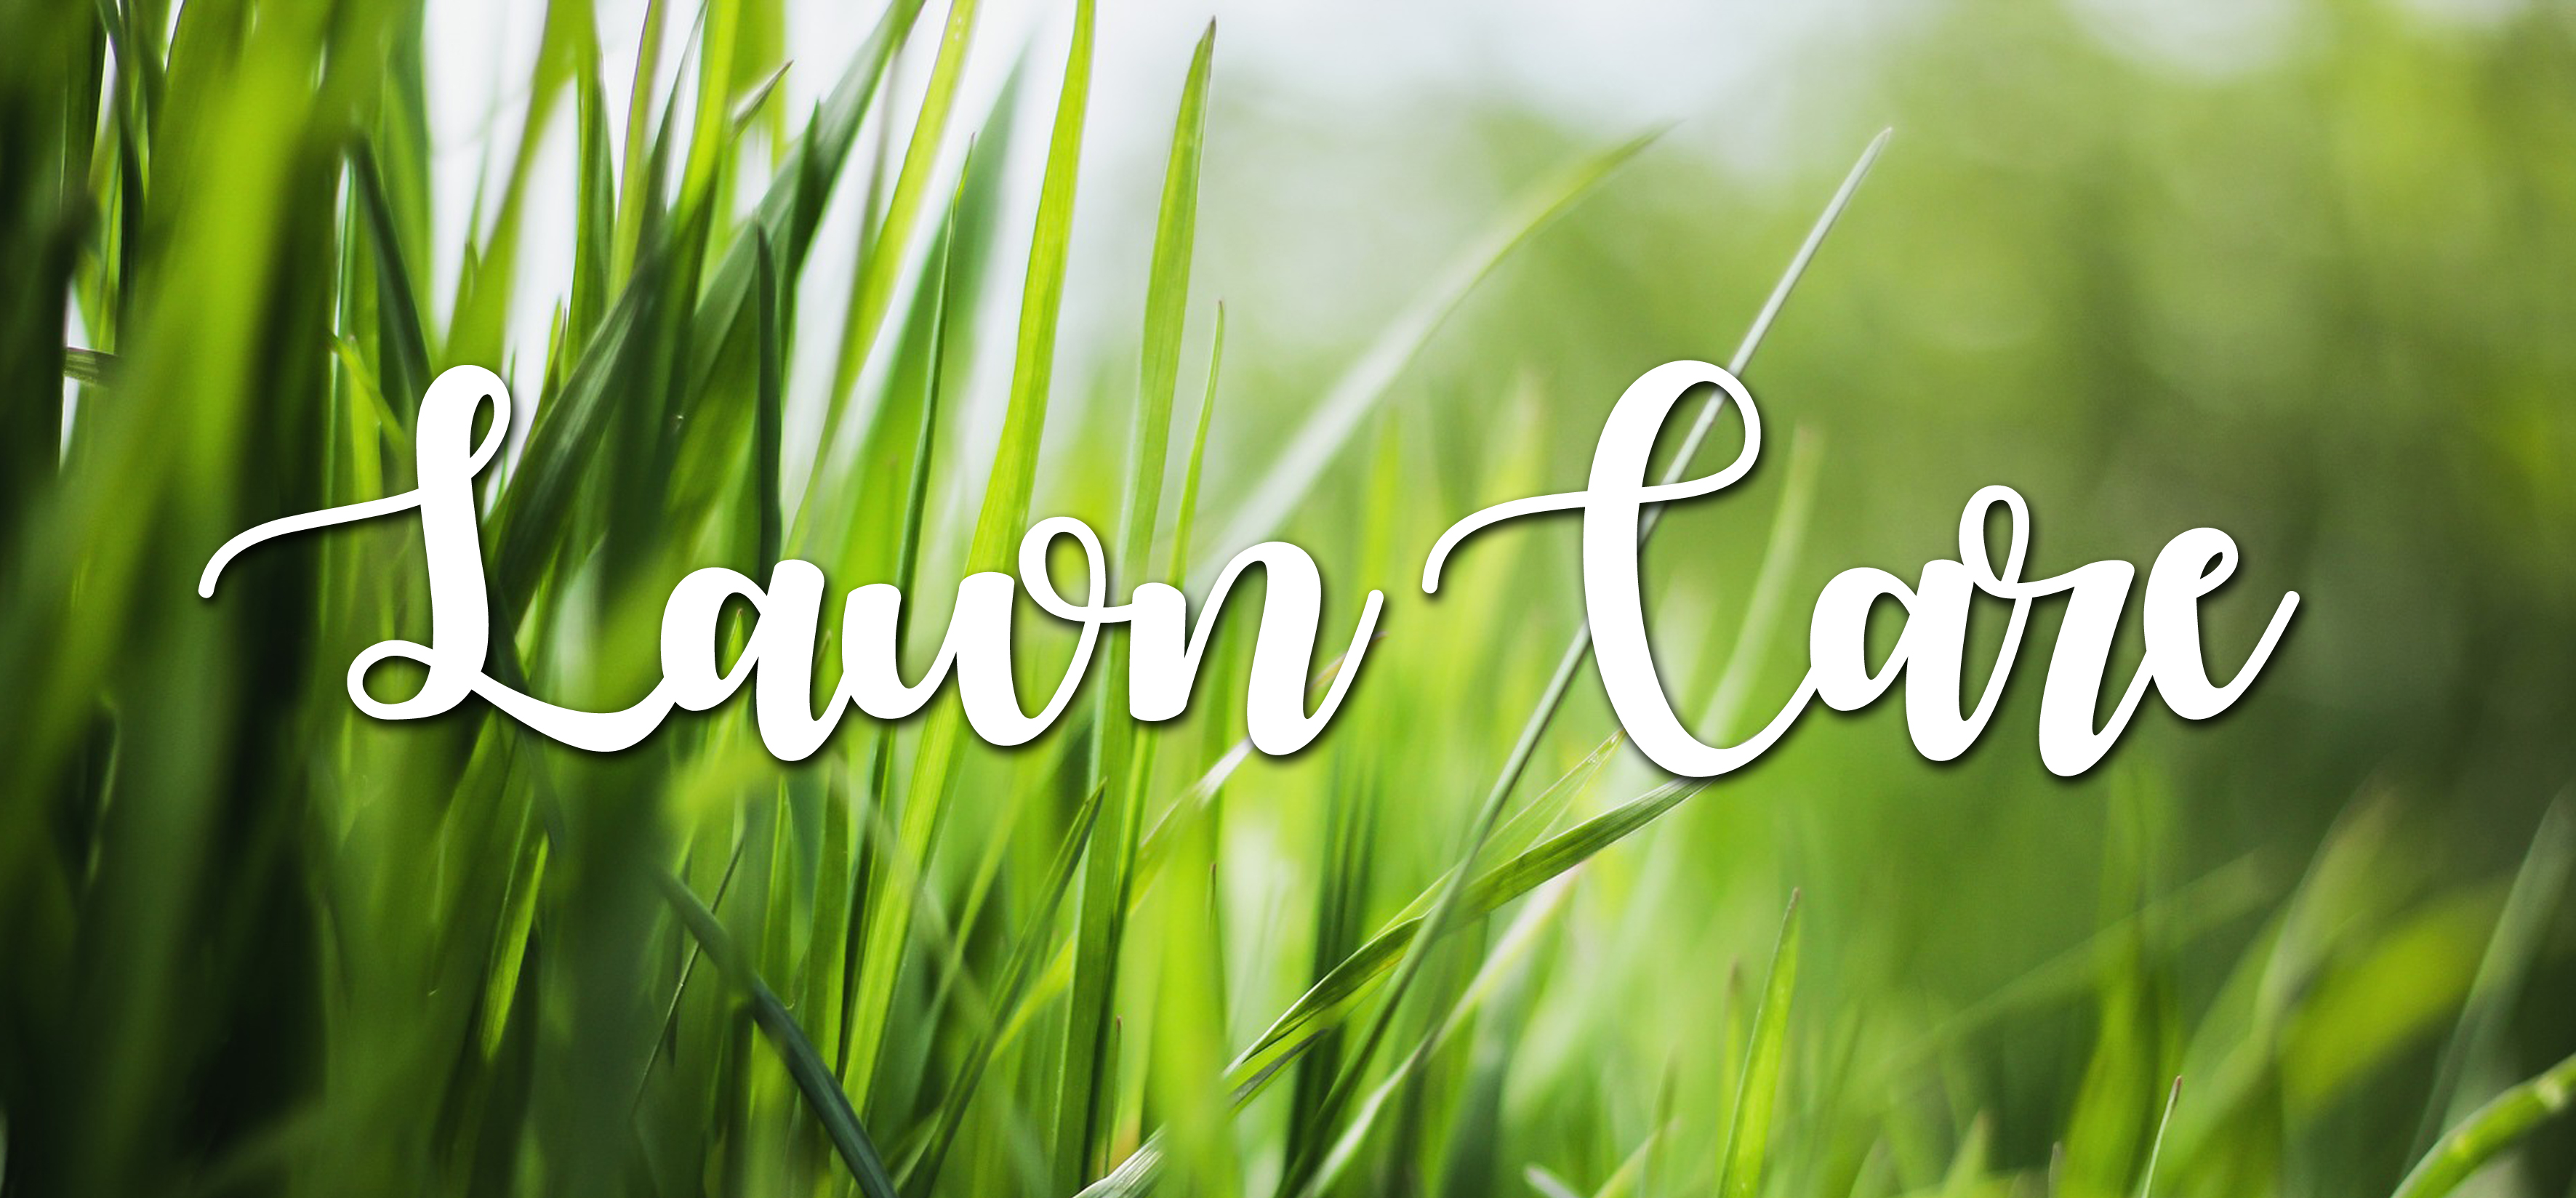 #askUpCountry – Lawn Care